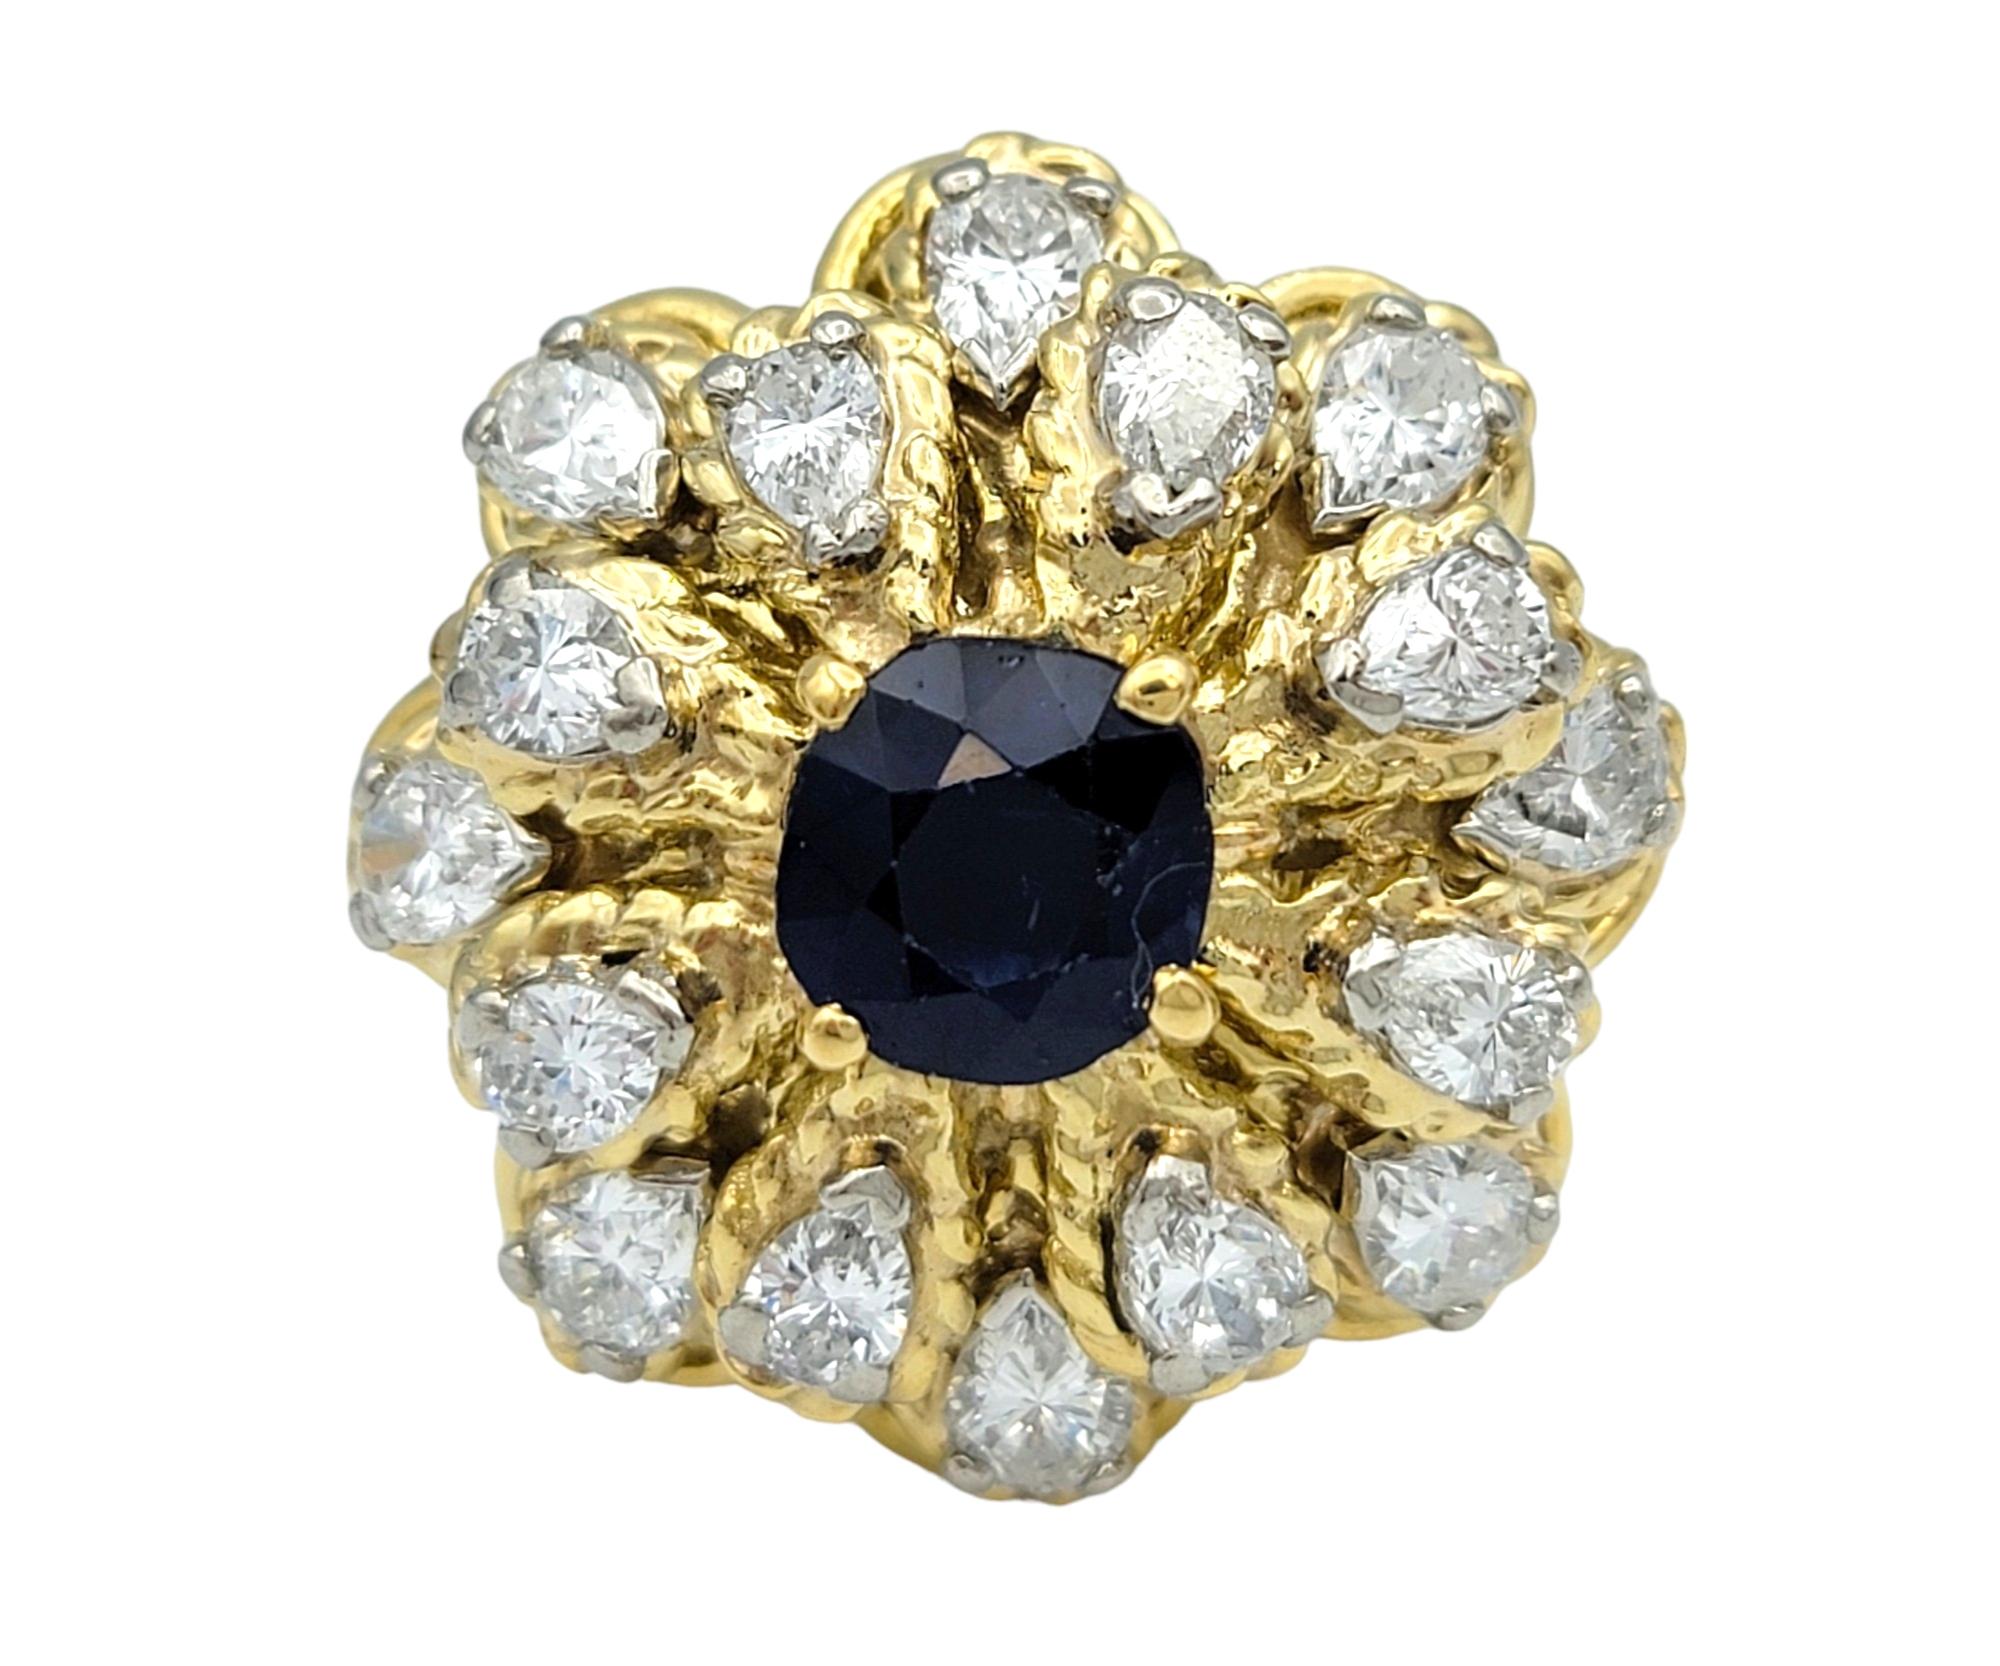 Ring Size: 3.75

This gorgeous blue sapphire and diamond flower design cocktail ring set in 18 karat yellow gold is a mesmerizing piece that exudes elegance and charm. At its center, a vibrant blue sapphire dazzles with its rich color and